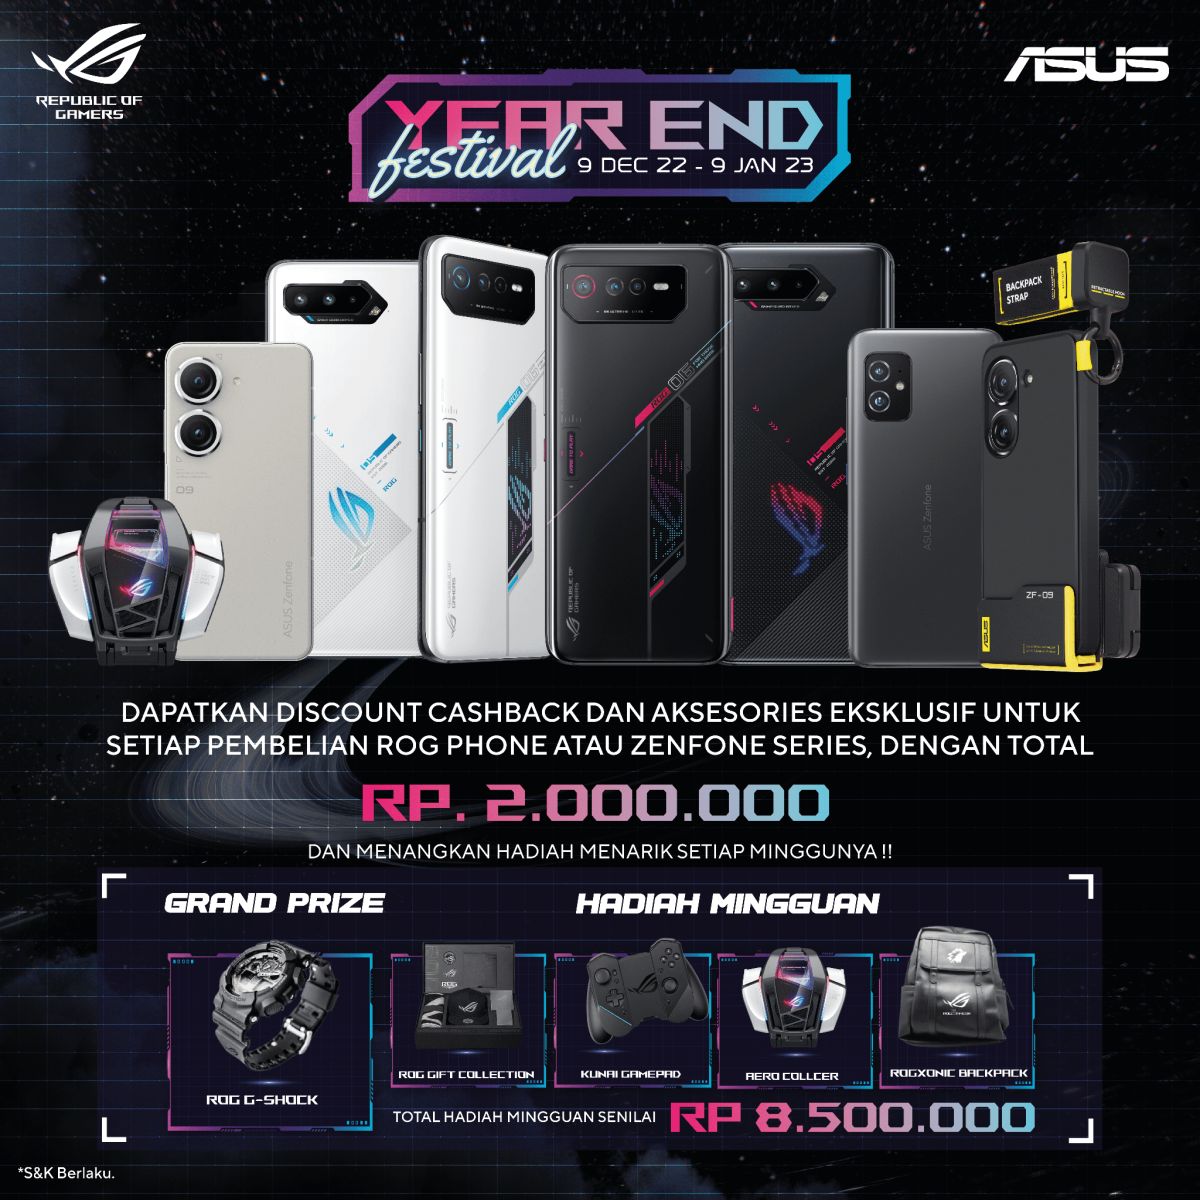 ASUS Year End Festival